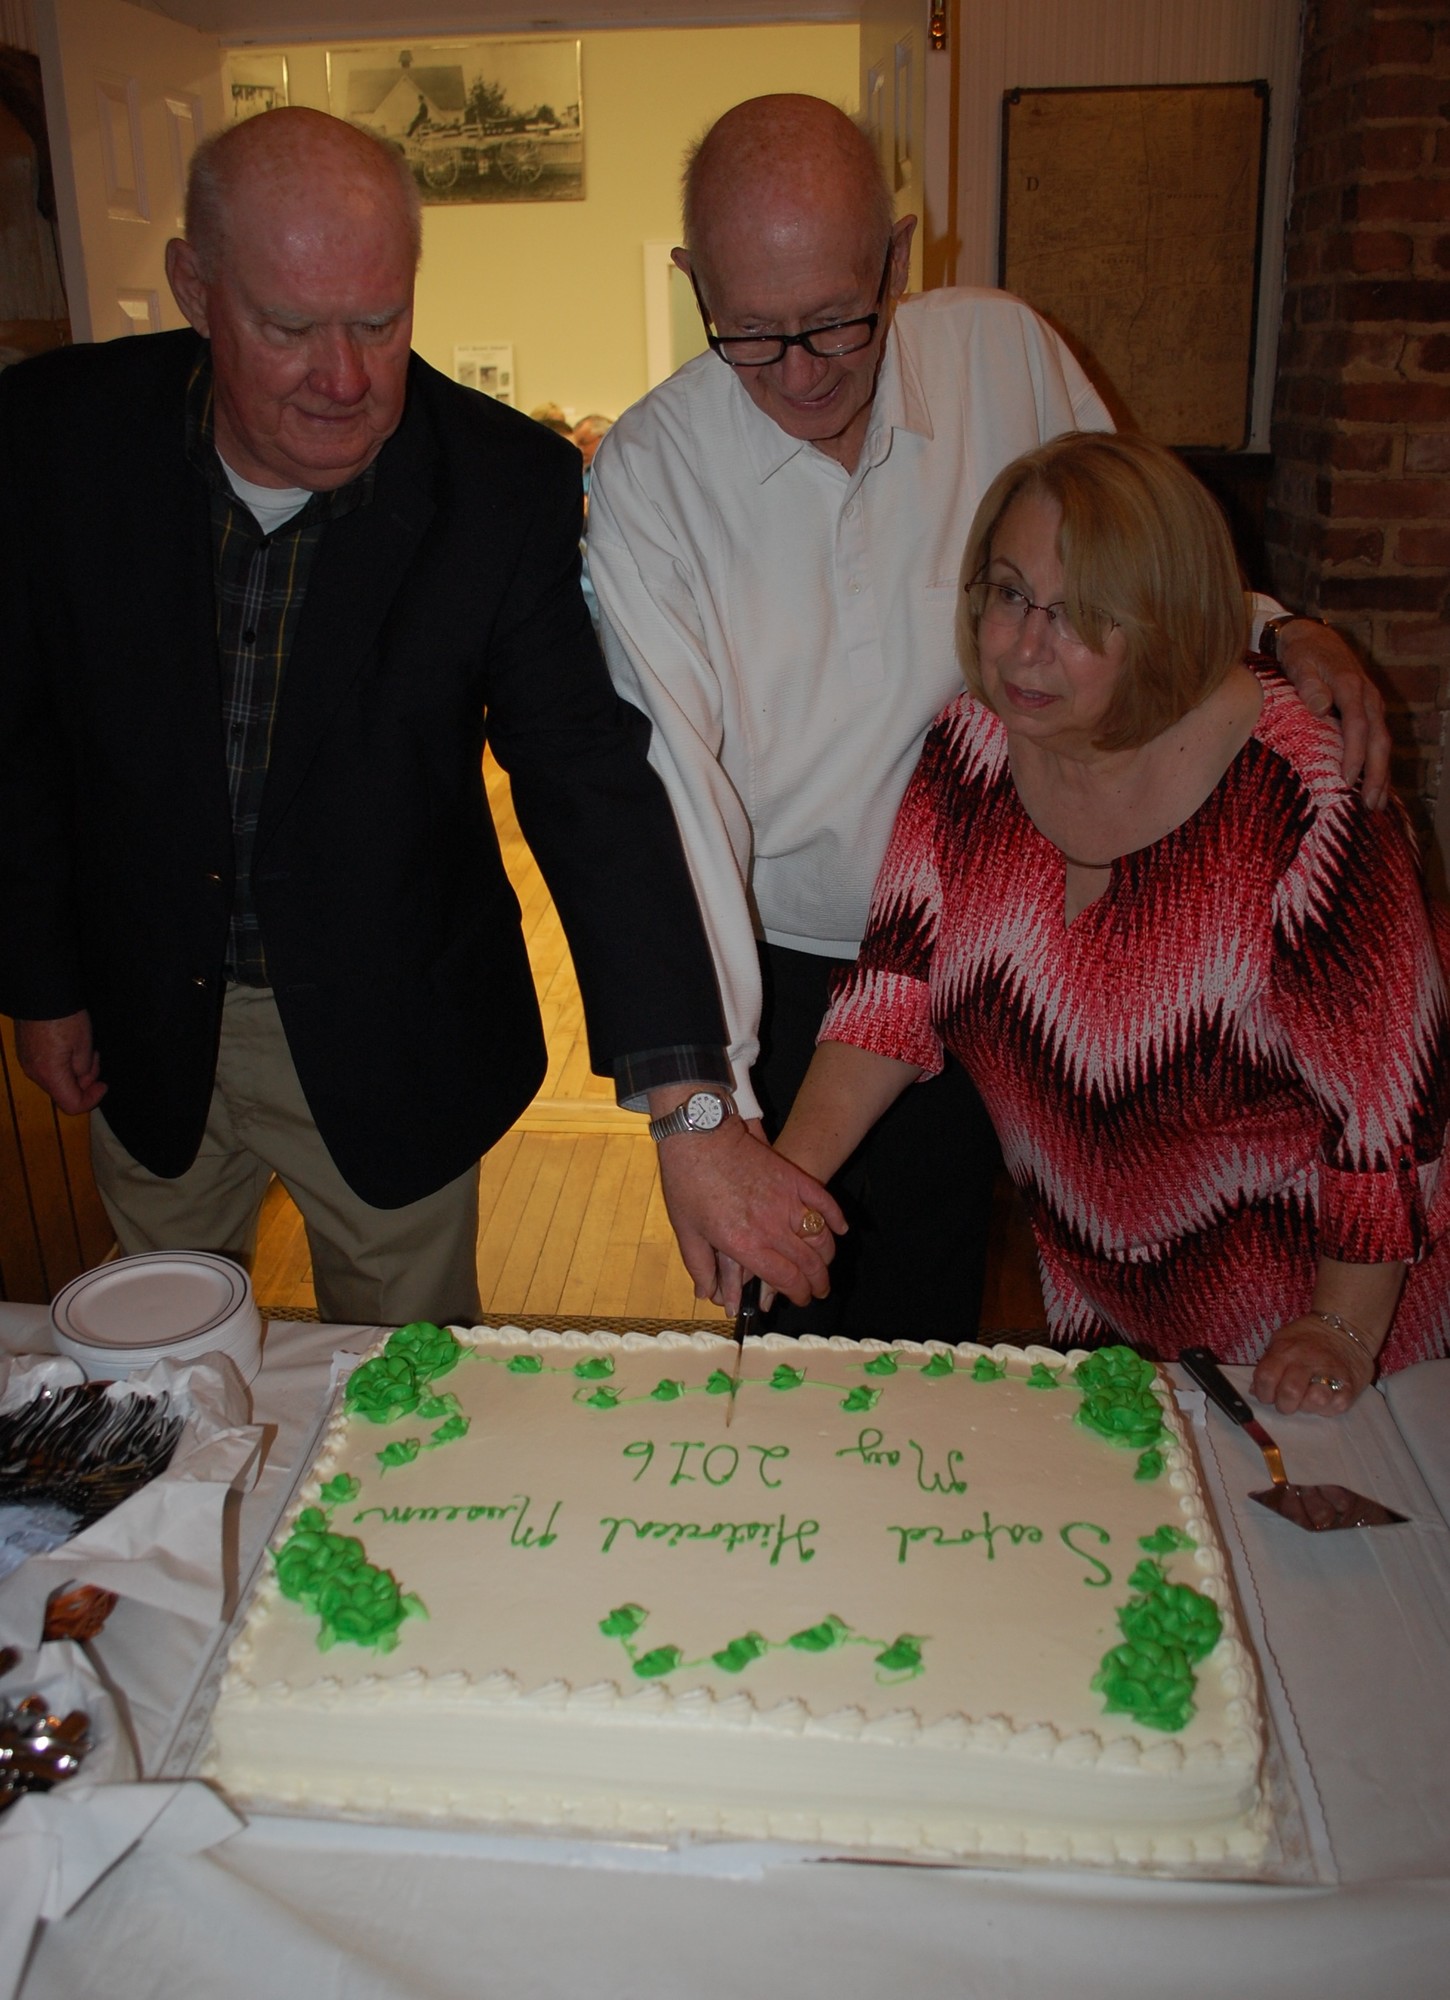 Past presidents Charles Wroblewski and Stan Bahr, and current president Judy Bongiovi, cut the cake to celebrate the re-opening of the Seaford Historical Museum.